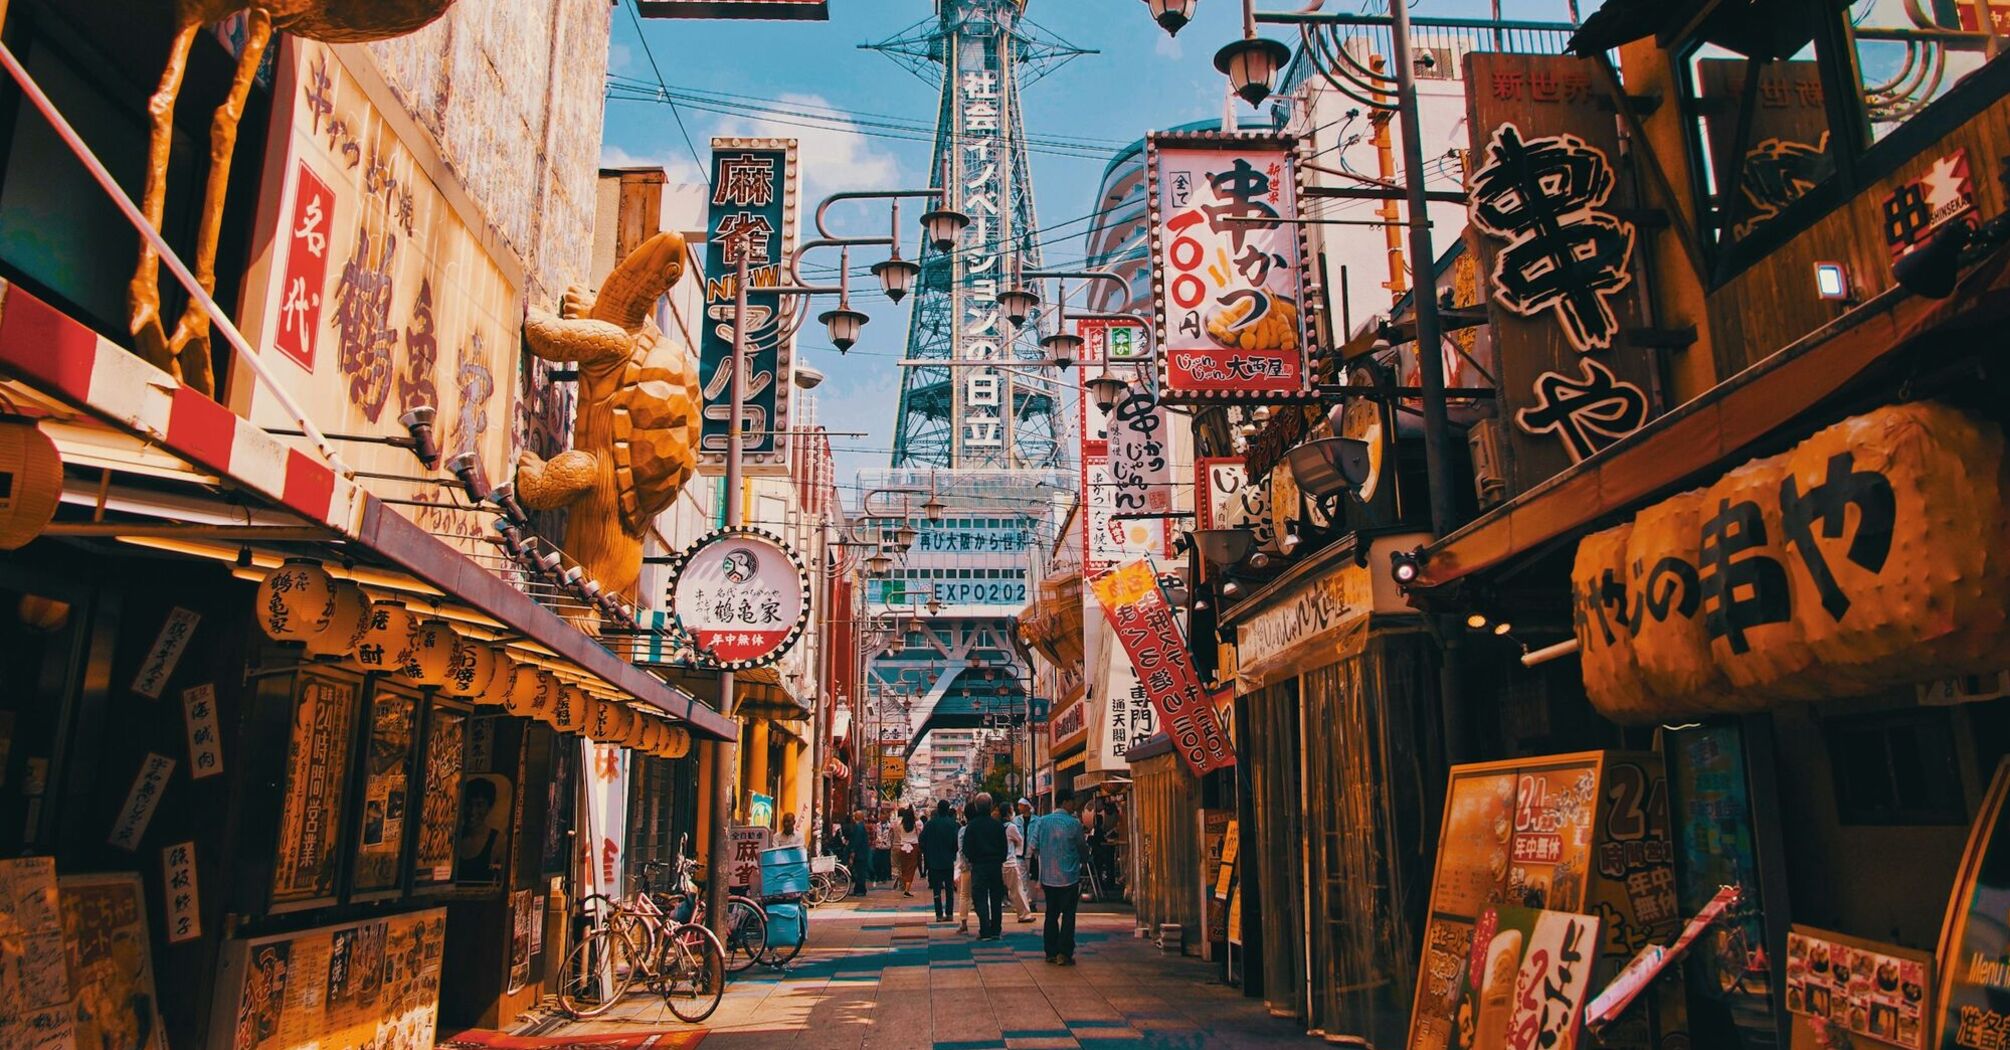 Colorful street in Osaka, Japan, with traditional signage and the iconic Tsutenkaku Tower in the background